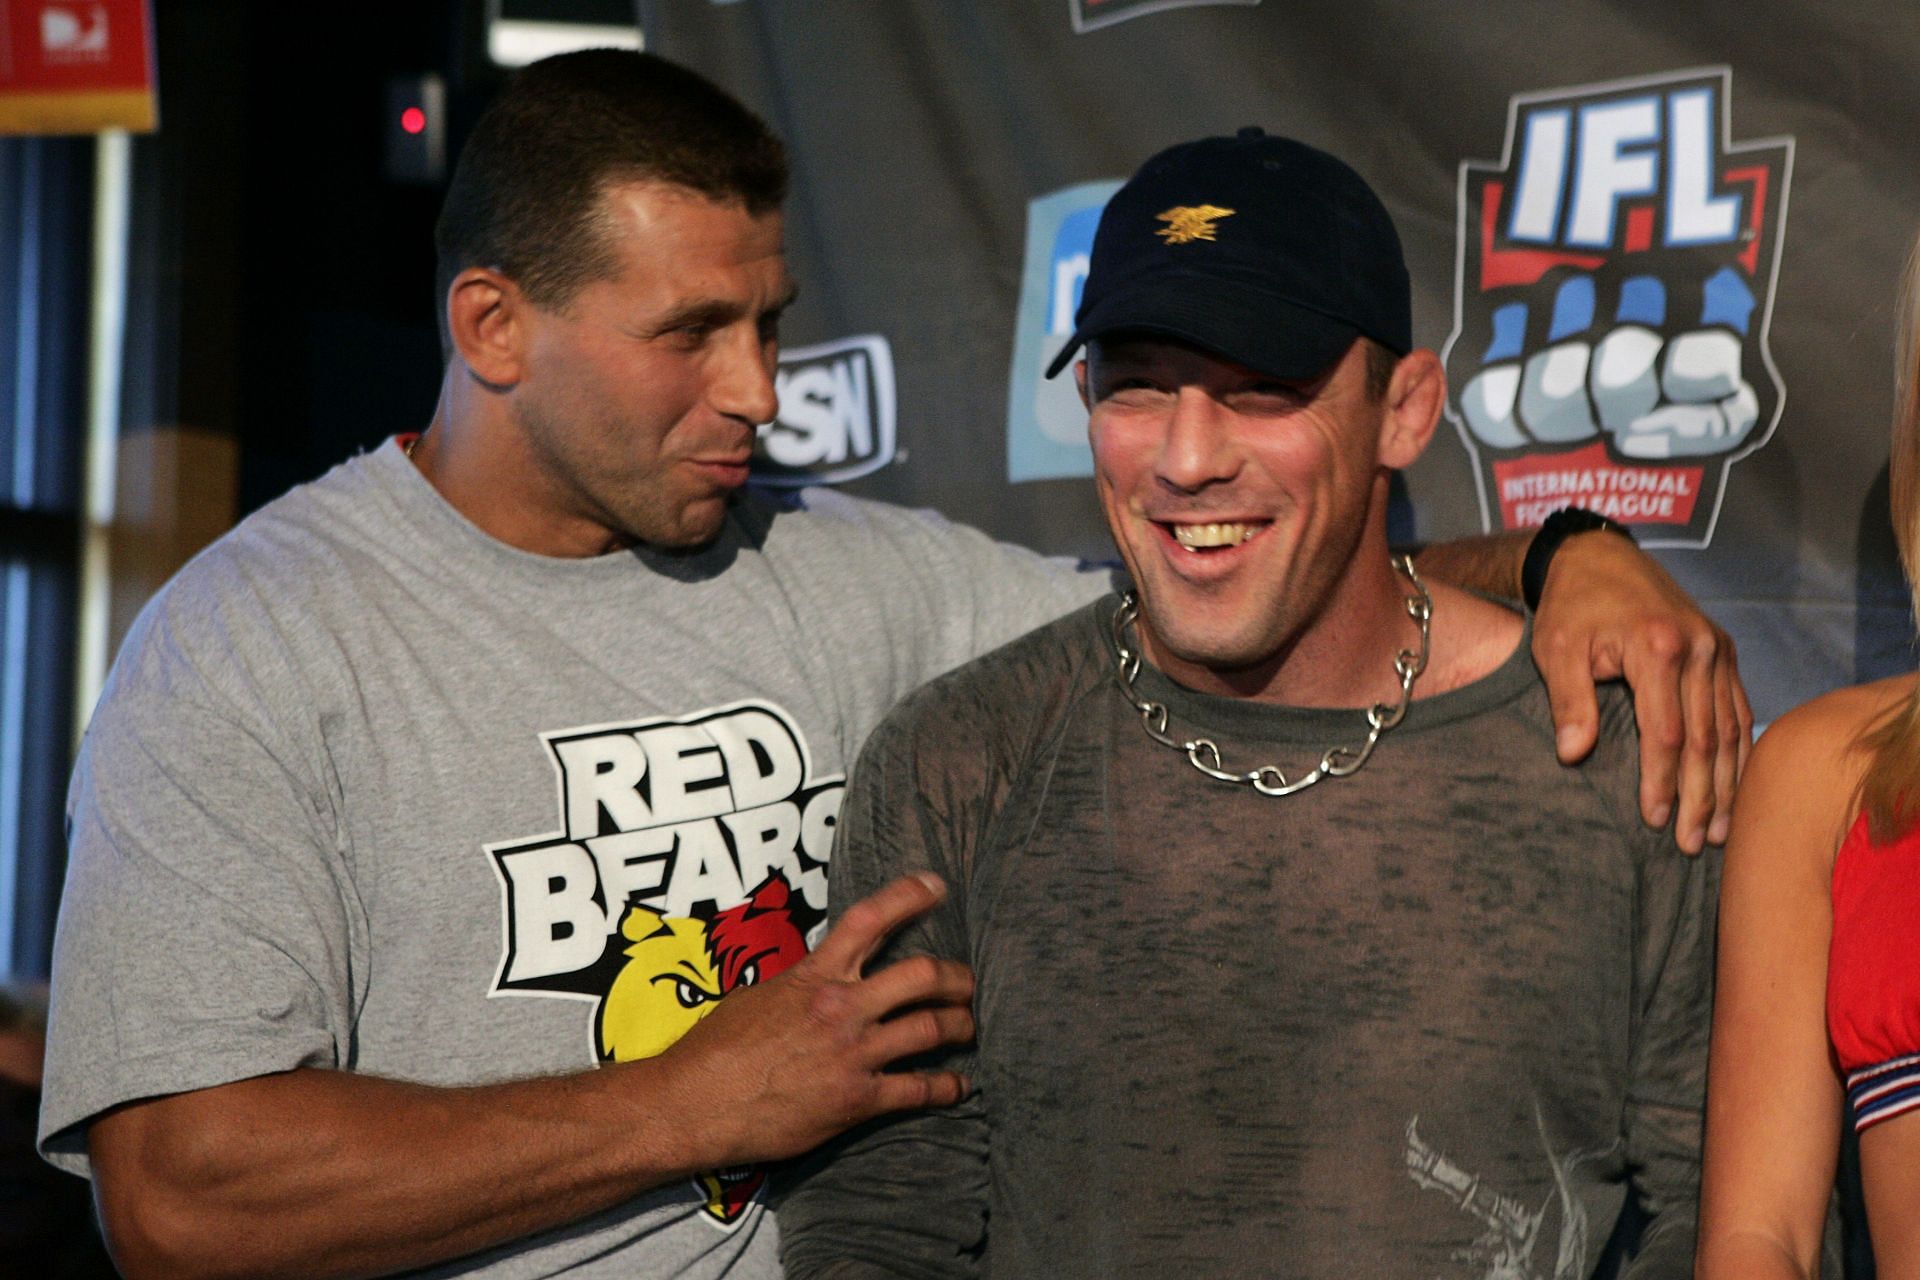 Inaugural welterweight kingpin Pat Miletich (right) returned from retirement in the IFL promotion